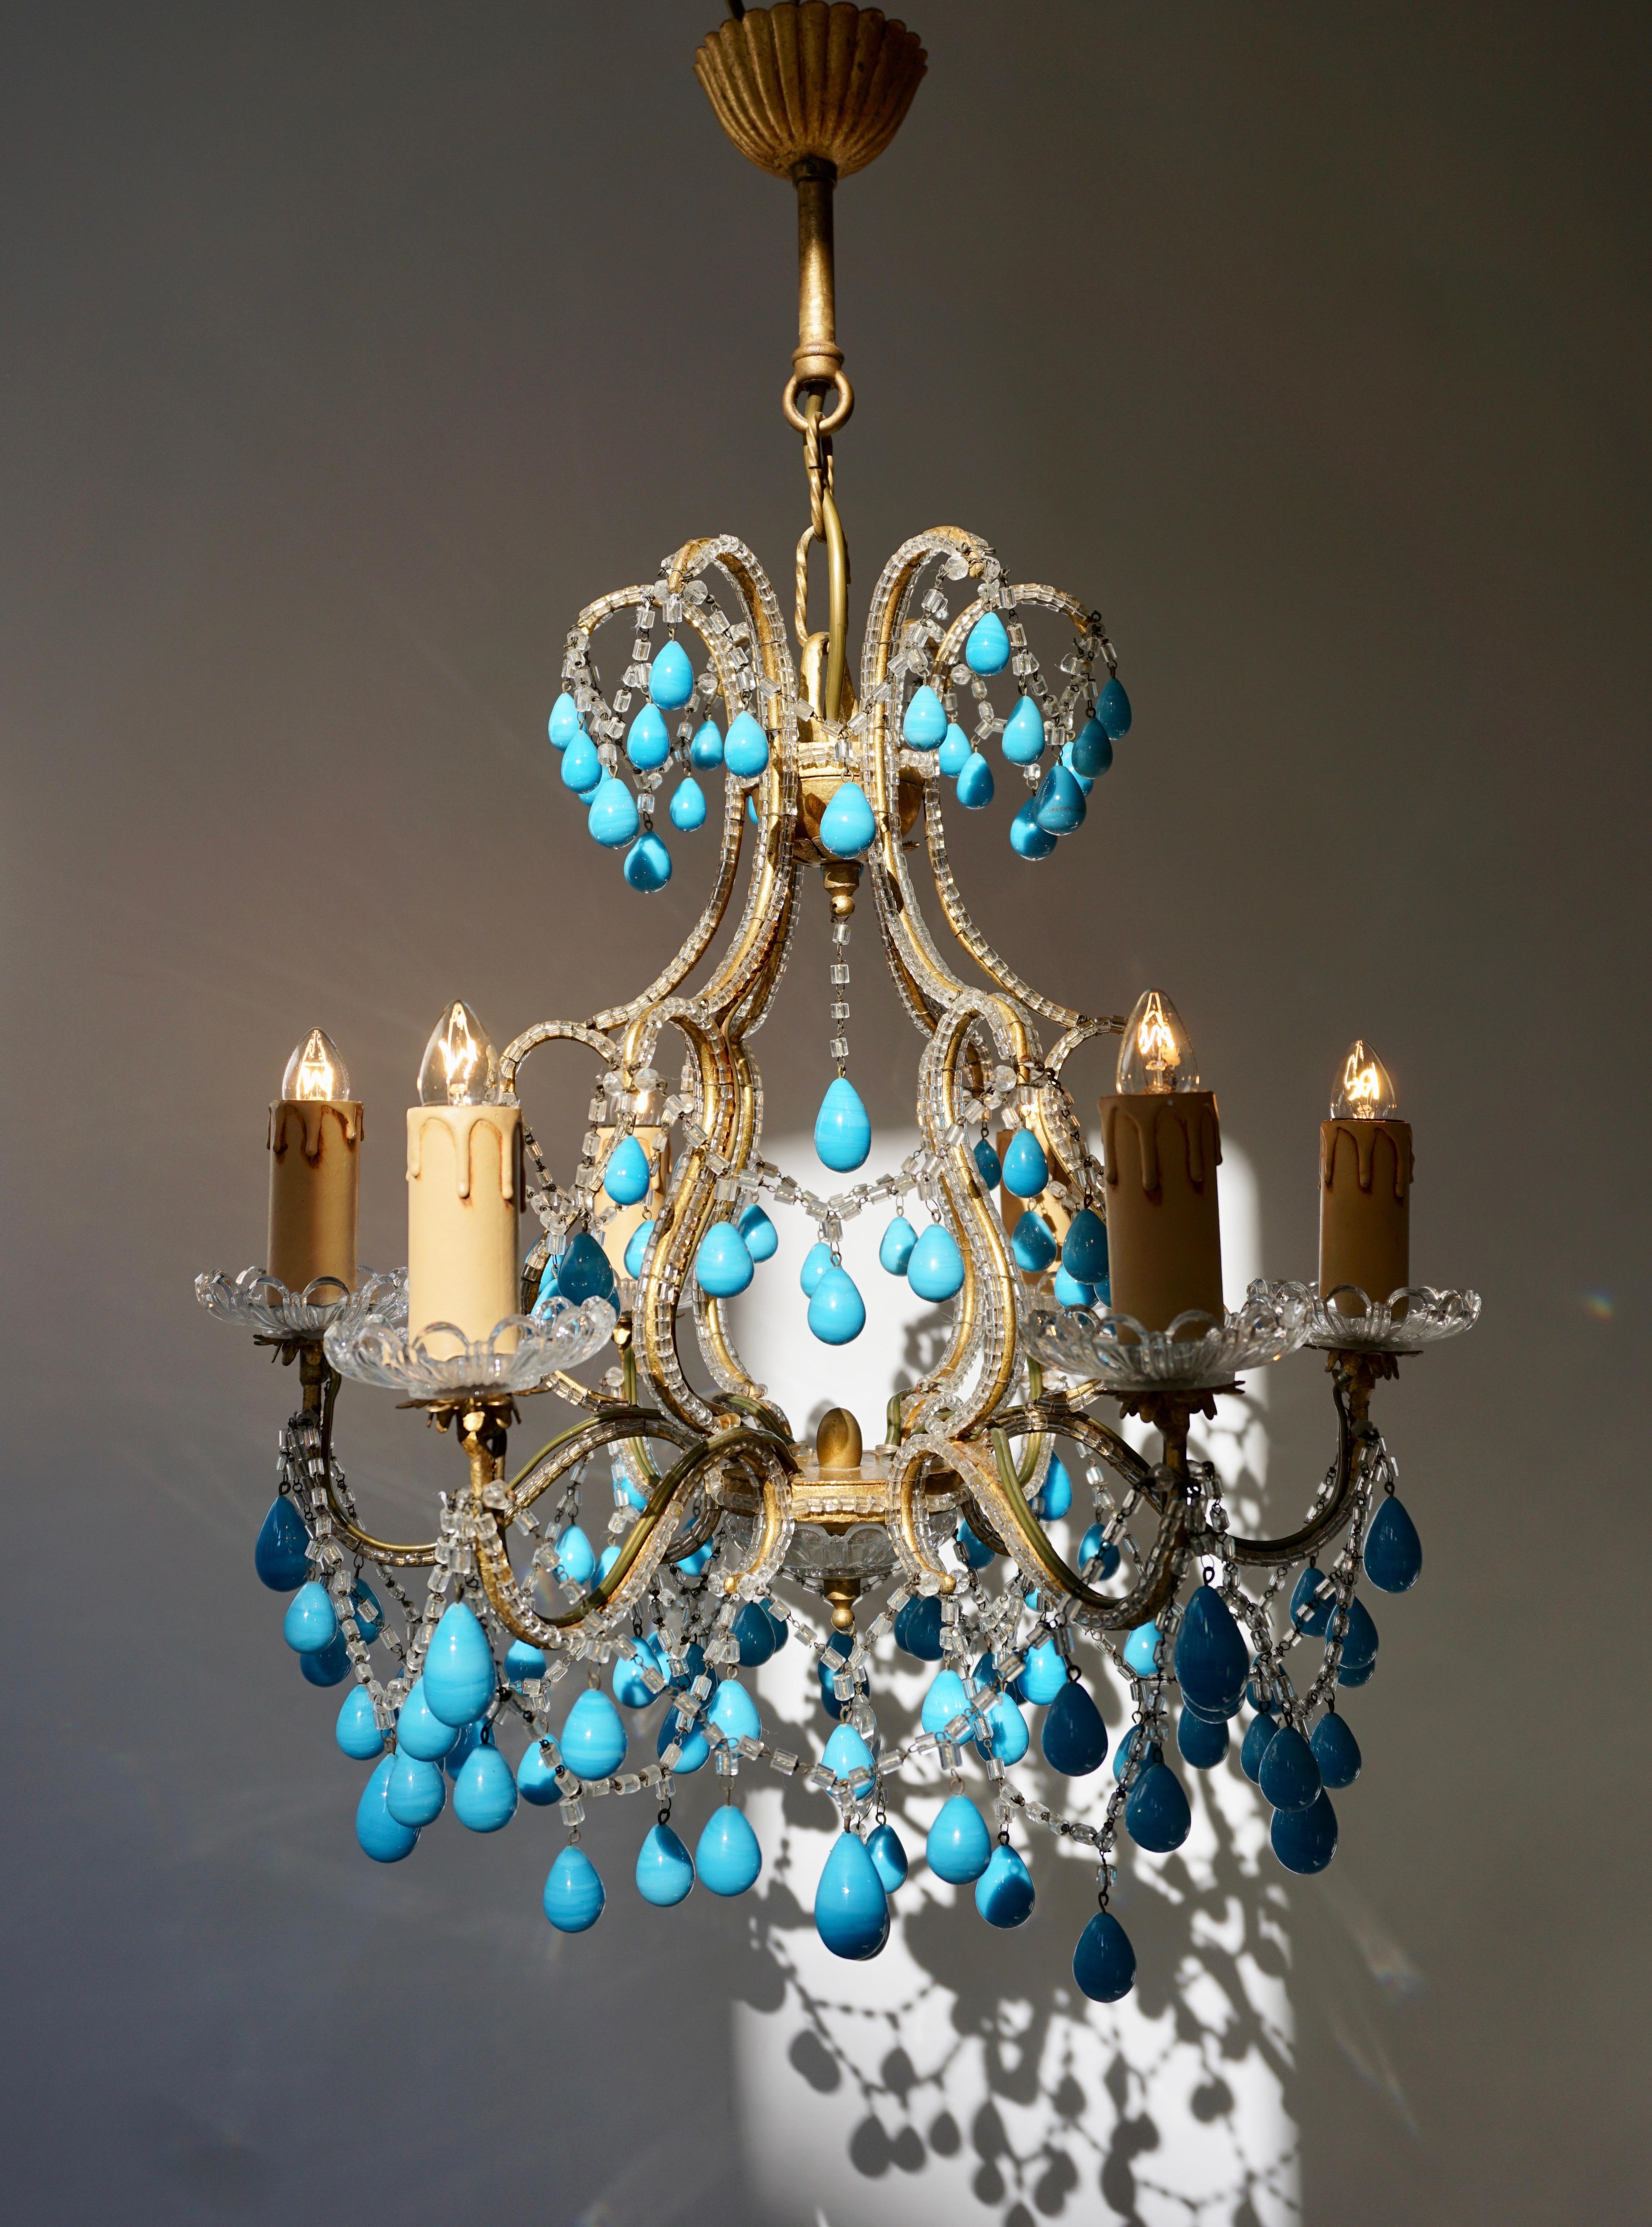 Six-arm chandelier with blue stone drops.
Measures: Diameter 45 cm.
Height fixture 45 cm.
Total height 65 cm.
Six E14 bulbs.